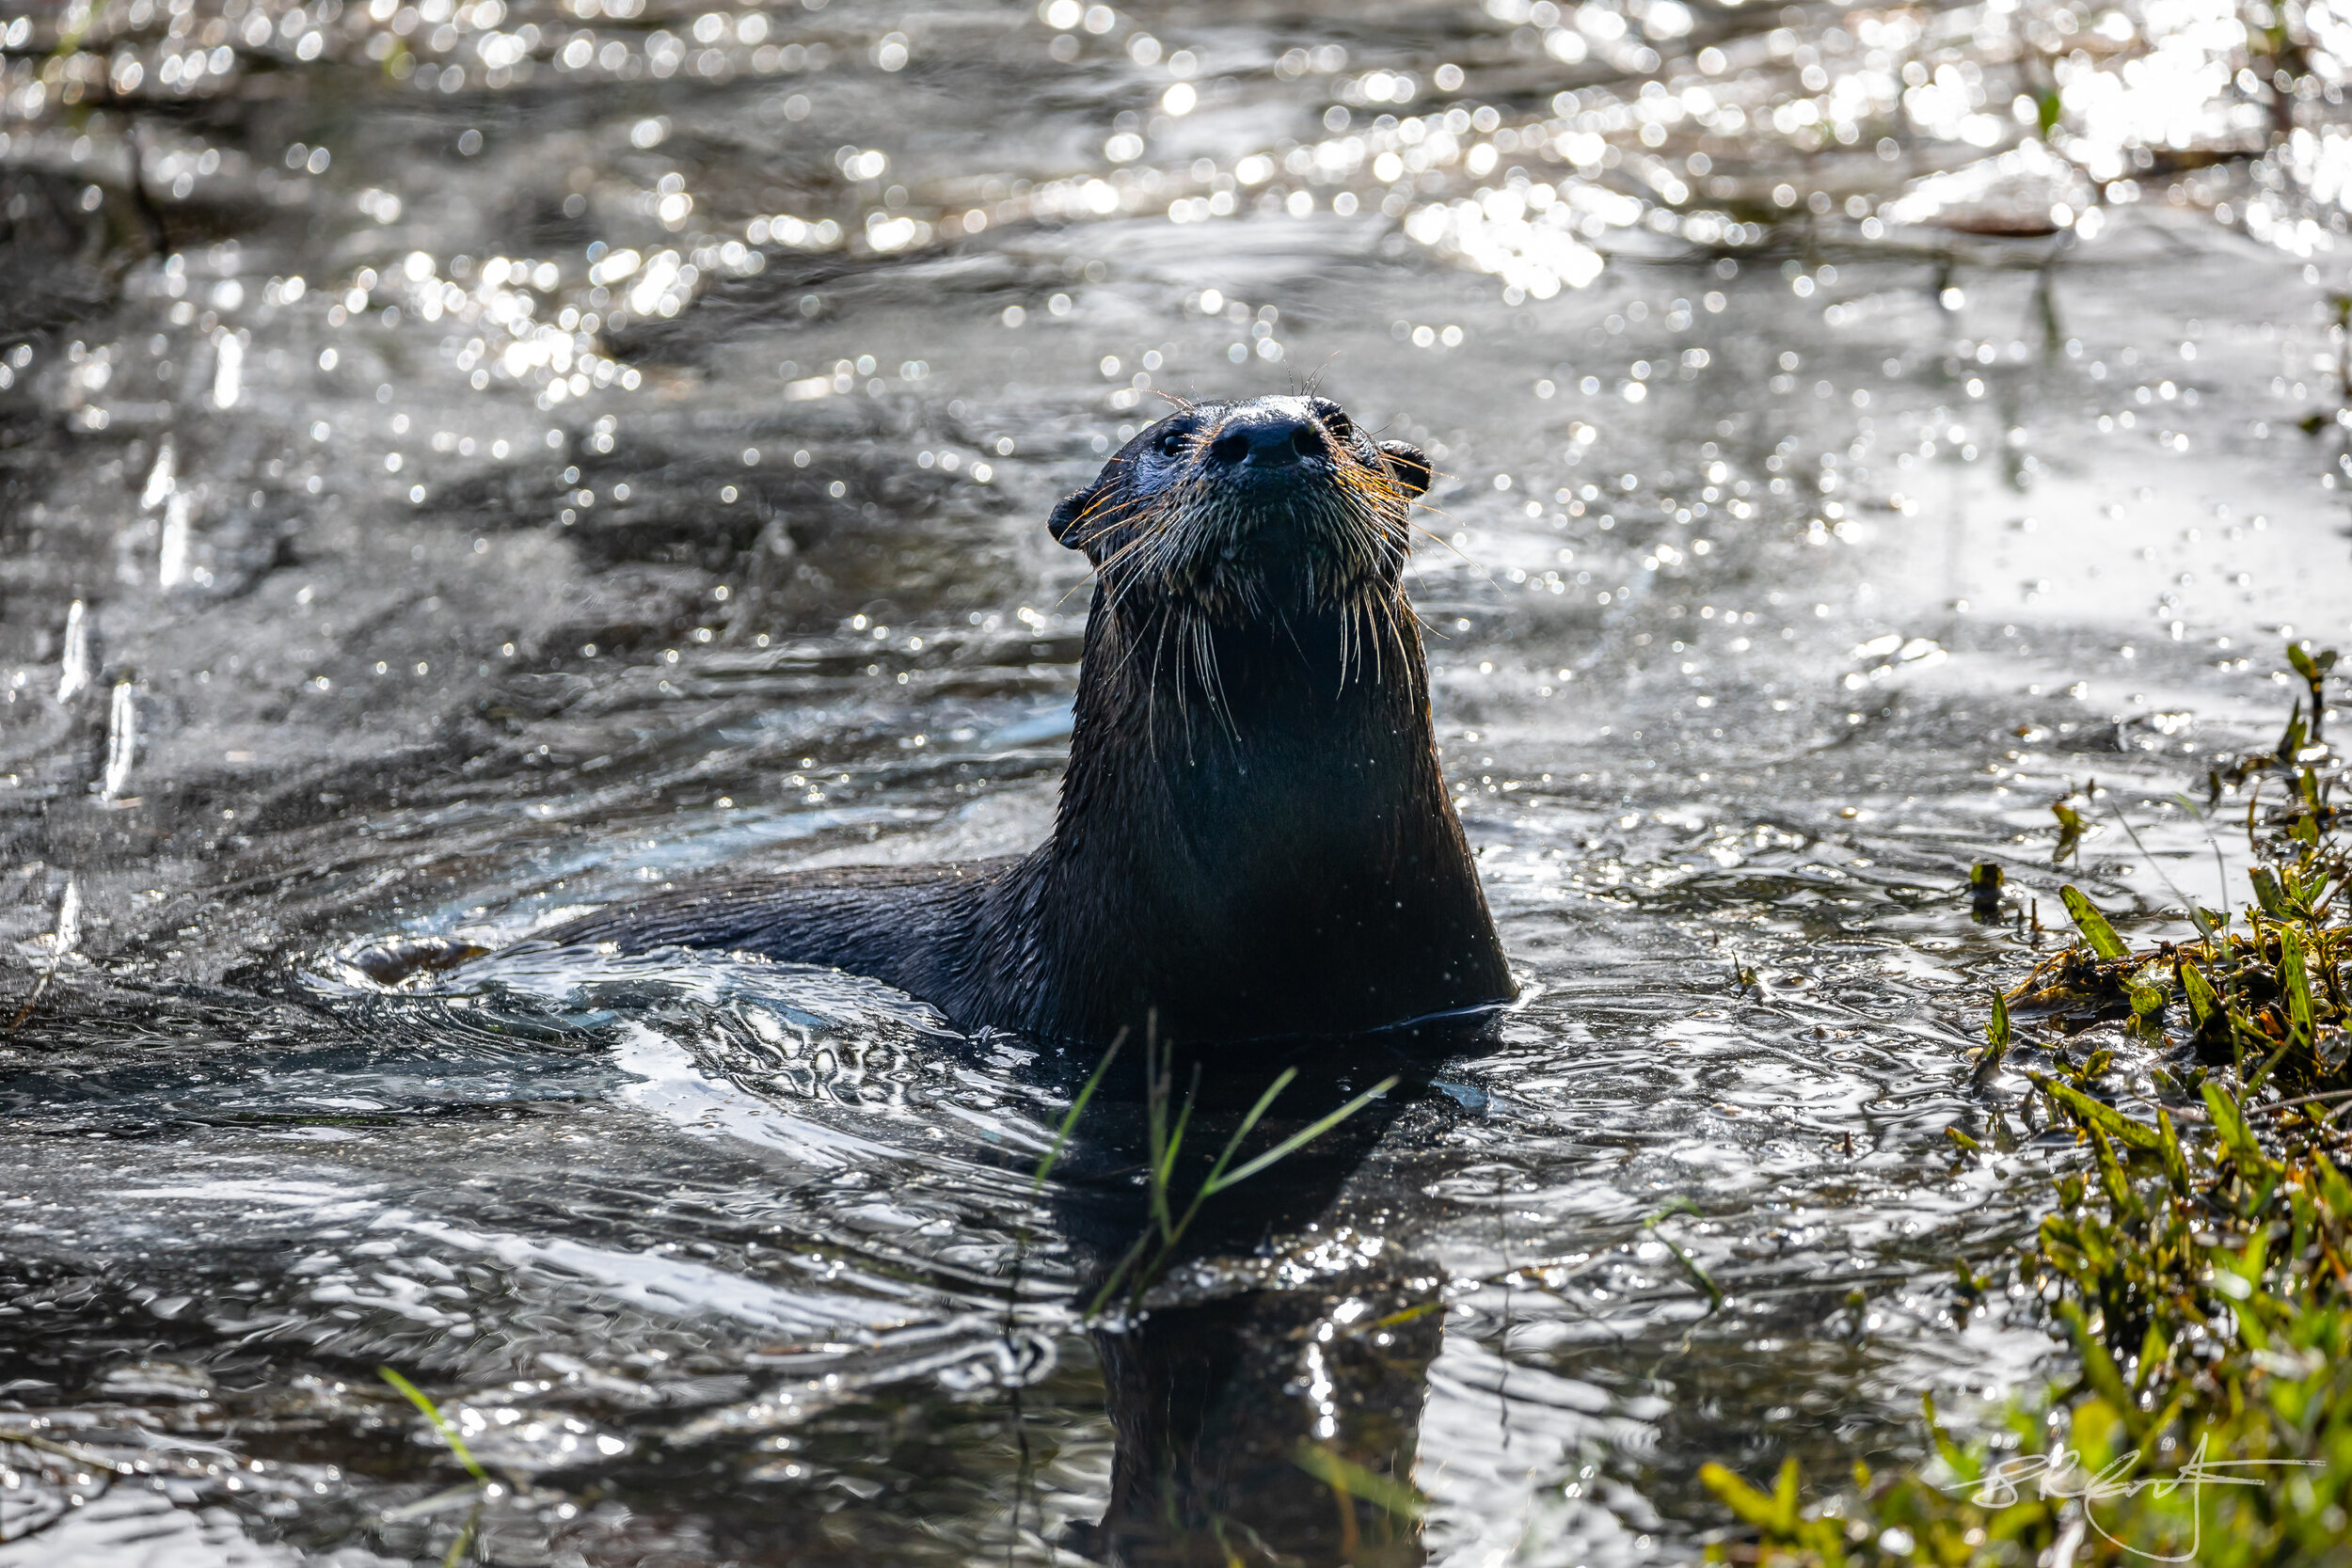 River Otter pops up and says hello.